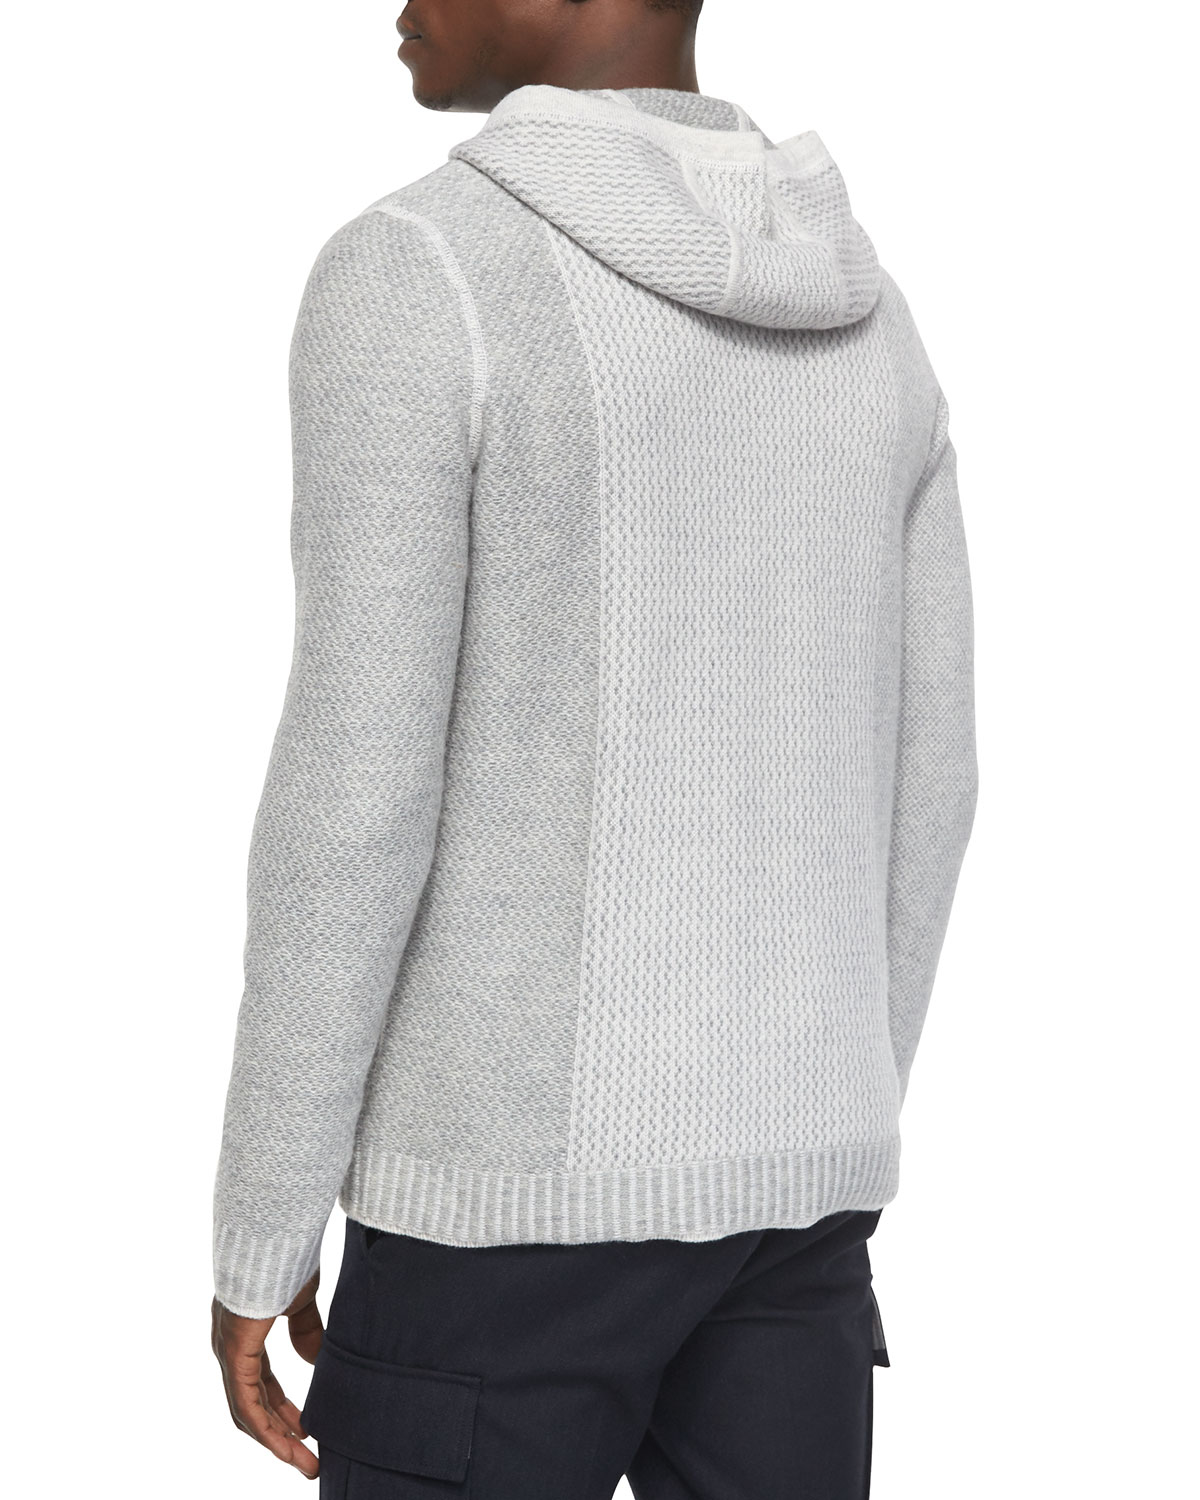 Lyst - Vince Textured Wool-blend Hoodie Sweater in White for Men